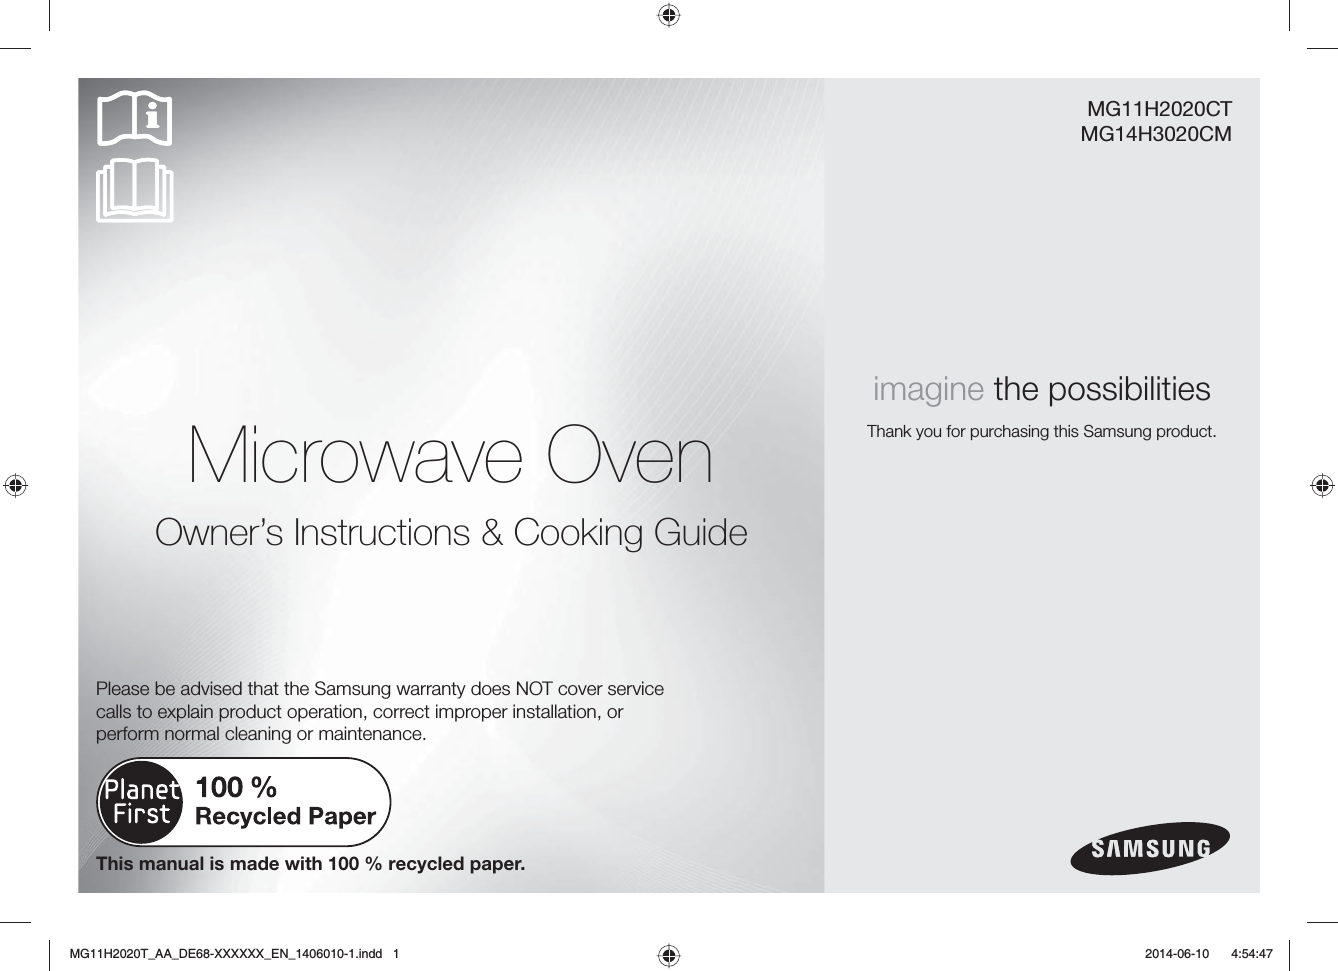 Microwave OvenOwner’s Instructions &amp; Cooking GuideMG11H2020CTMG14H3020CMimagine the possibilitiesThank you for purchasing this Samsung product.This manual is made with 100 % recycled paper.Please be advised that the Samsung warranty does NOT cover service calls to explain product operation, correct improper installation, or perform normal cleaning or maintenance./)*6A##A&amp;&apos;::::::A&apos;0AKPFF  